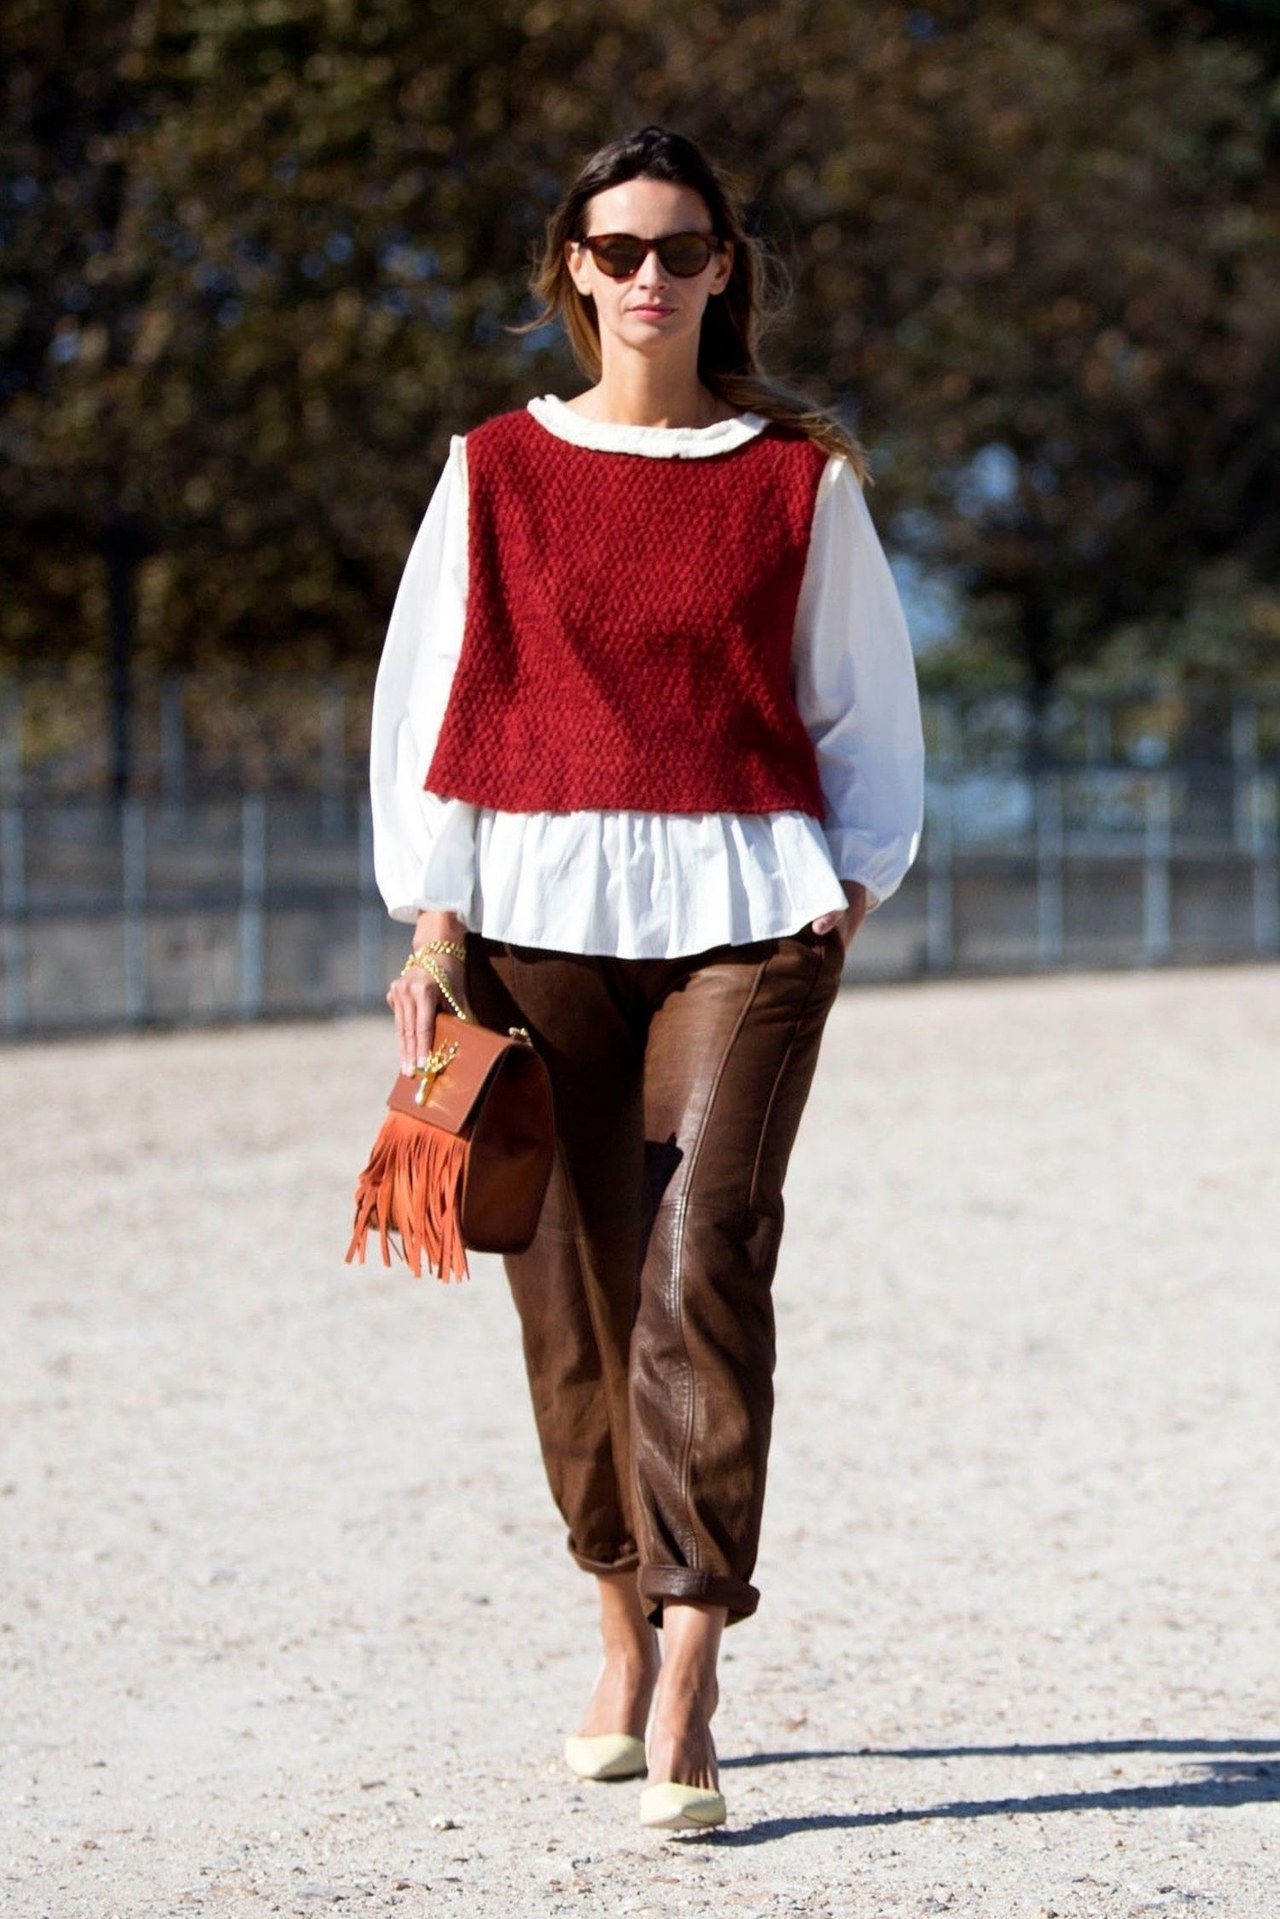 zima red outfit ideas melodie jeng layer sweater vest